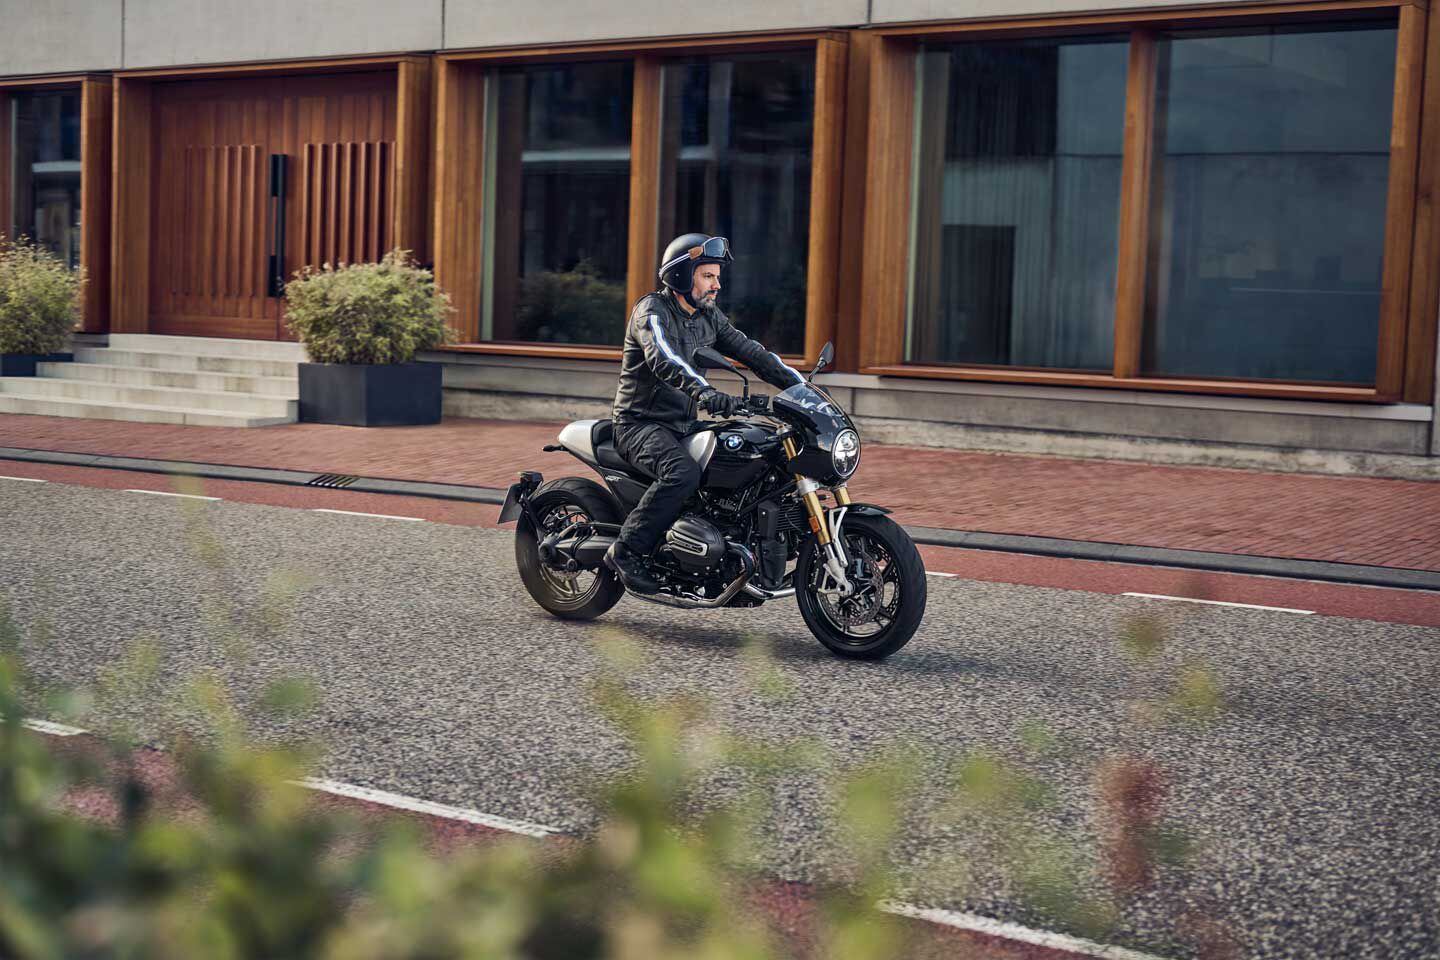 The R 12 nineT has more engine modes, more horsepower, and more torque than the R 12.